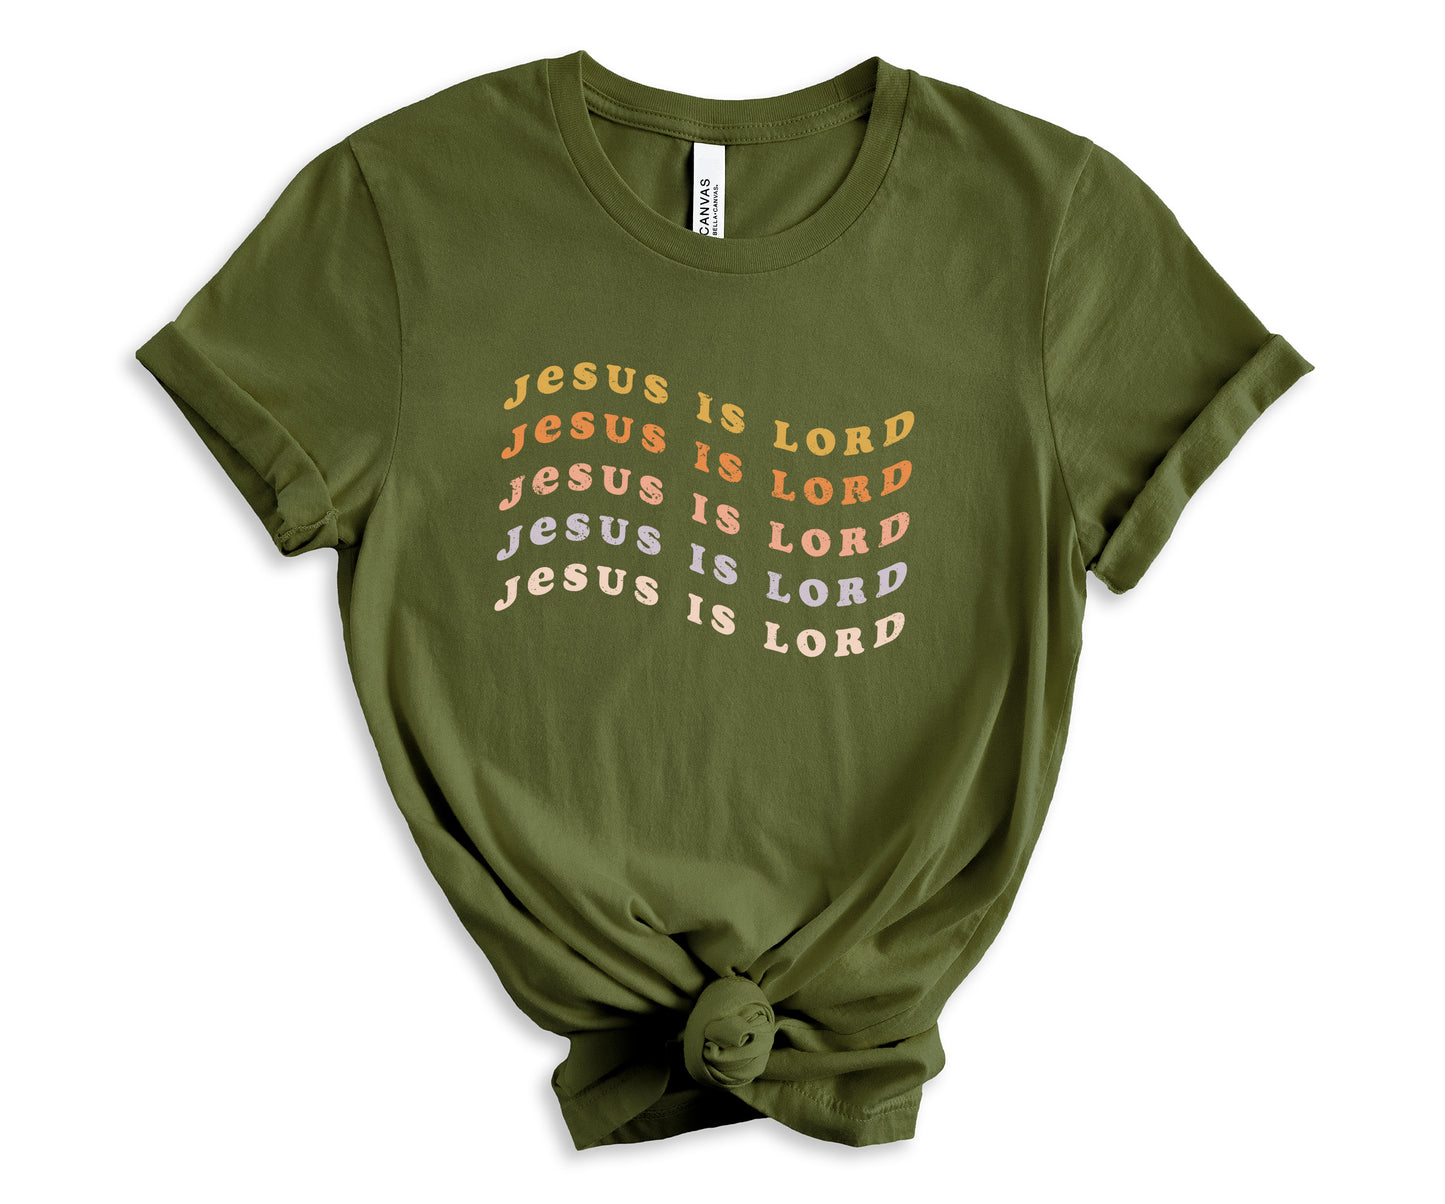 Jesus is Lord T-shirt